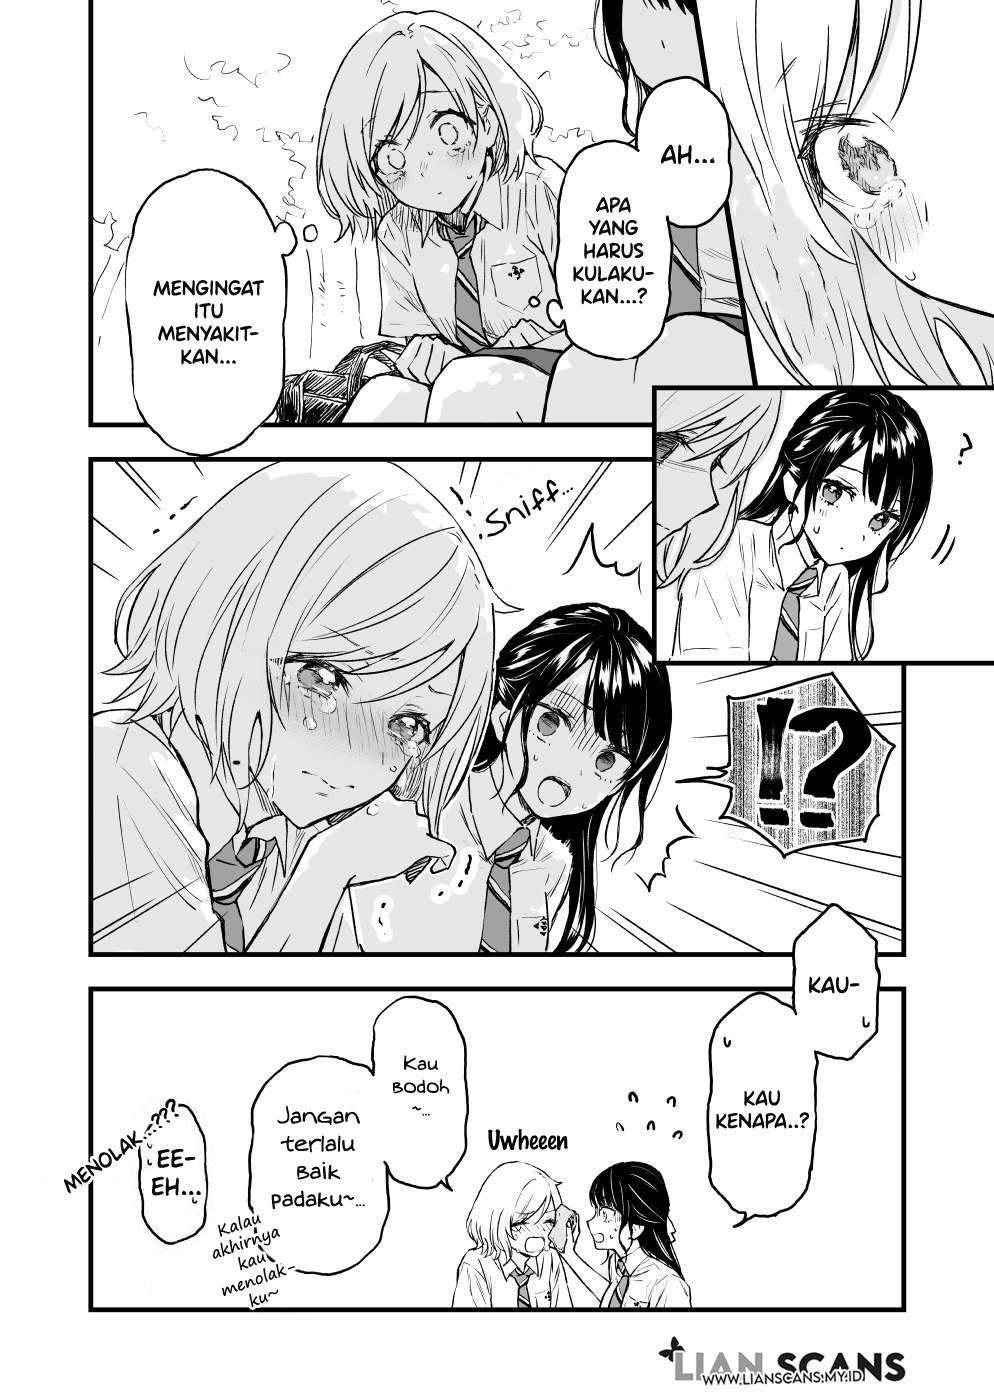 A Yuri Manga That Starts With Getting Rejected in a Dream Chapter 3